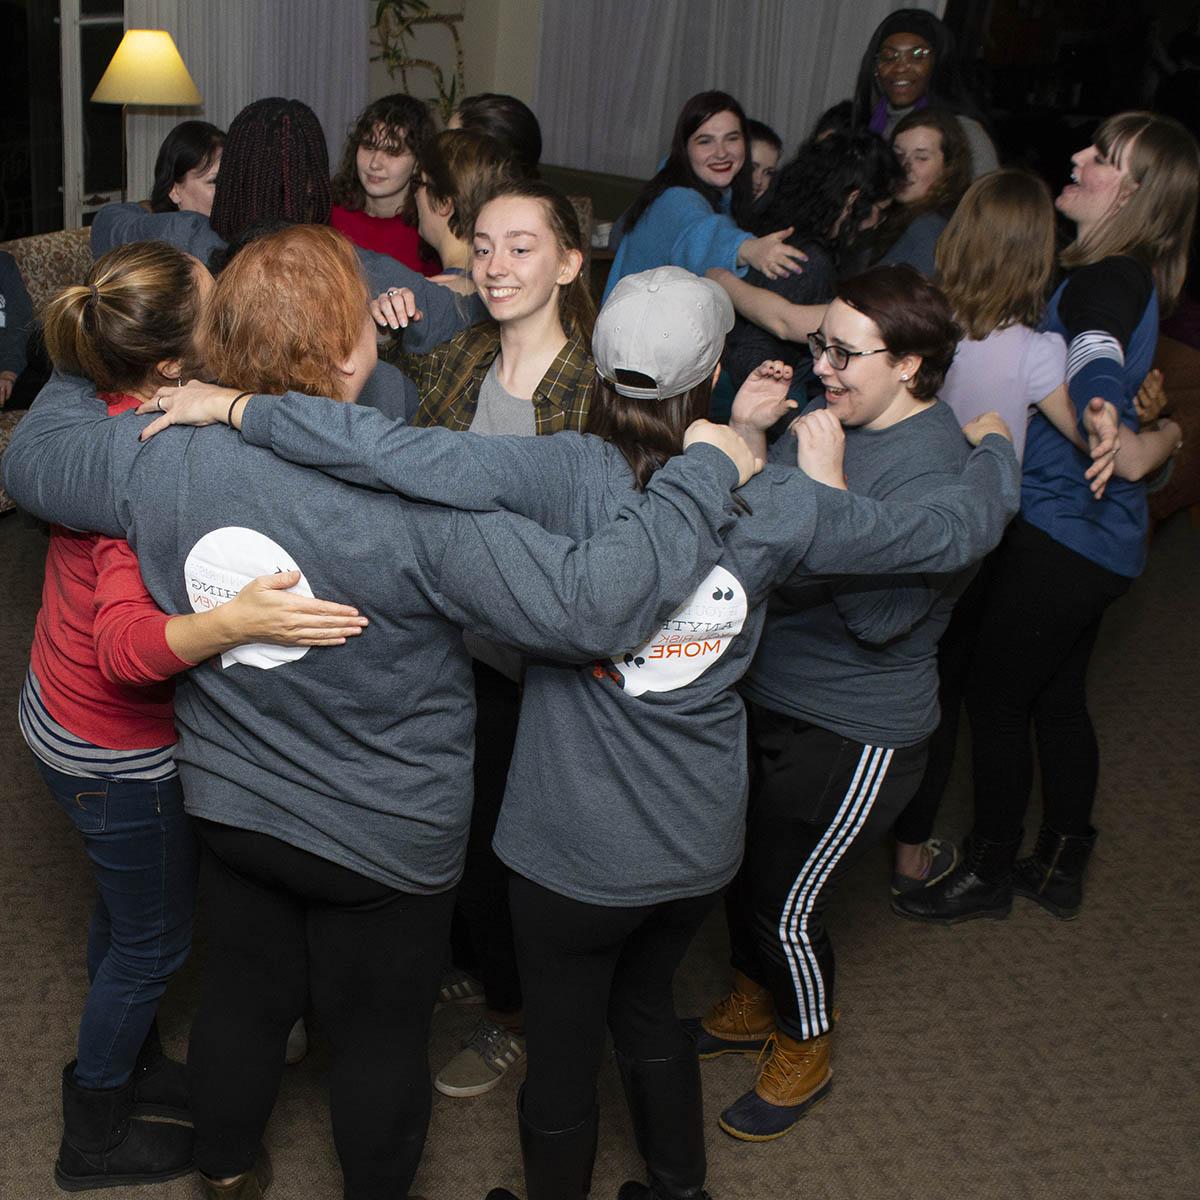 Photo of a group of women smiling in a group hug